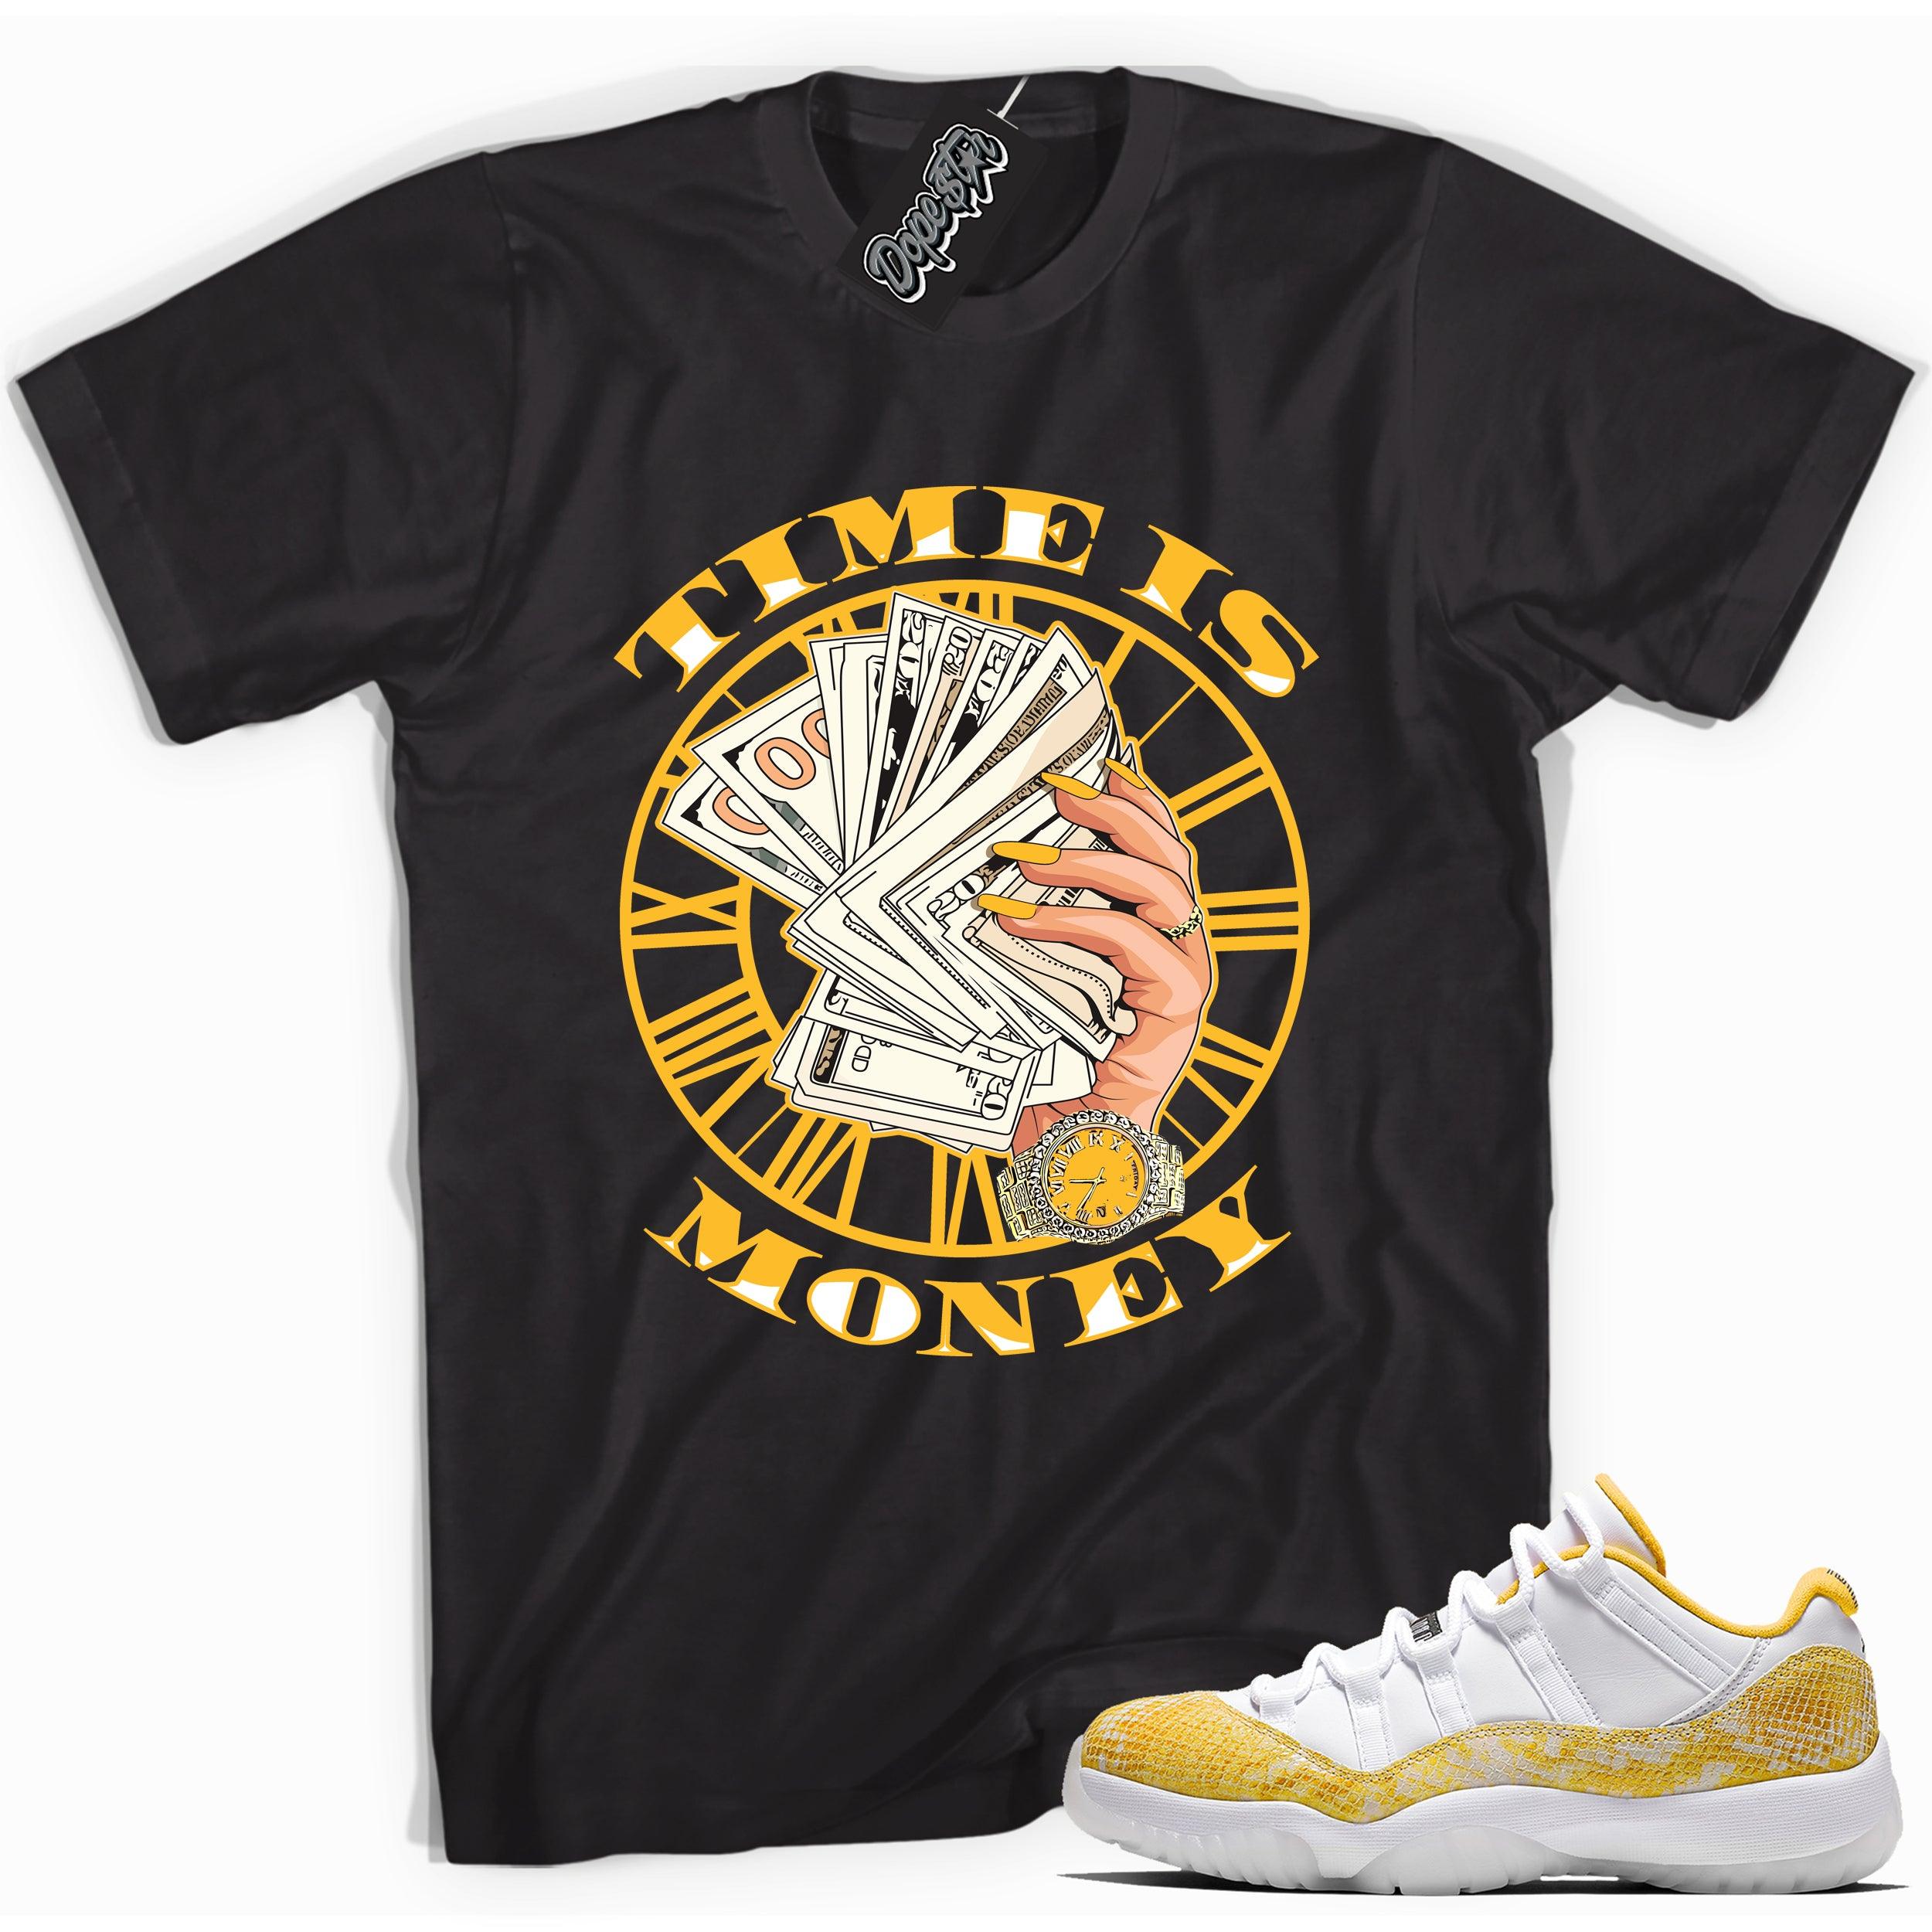 Cool black graphic tee with 'Time Is Money' print, that perfectly matches  Air Jordan 11 Retro Low Yellow Snakeskin sneakers